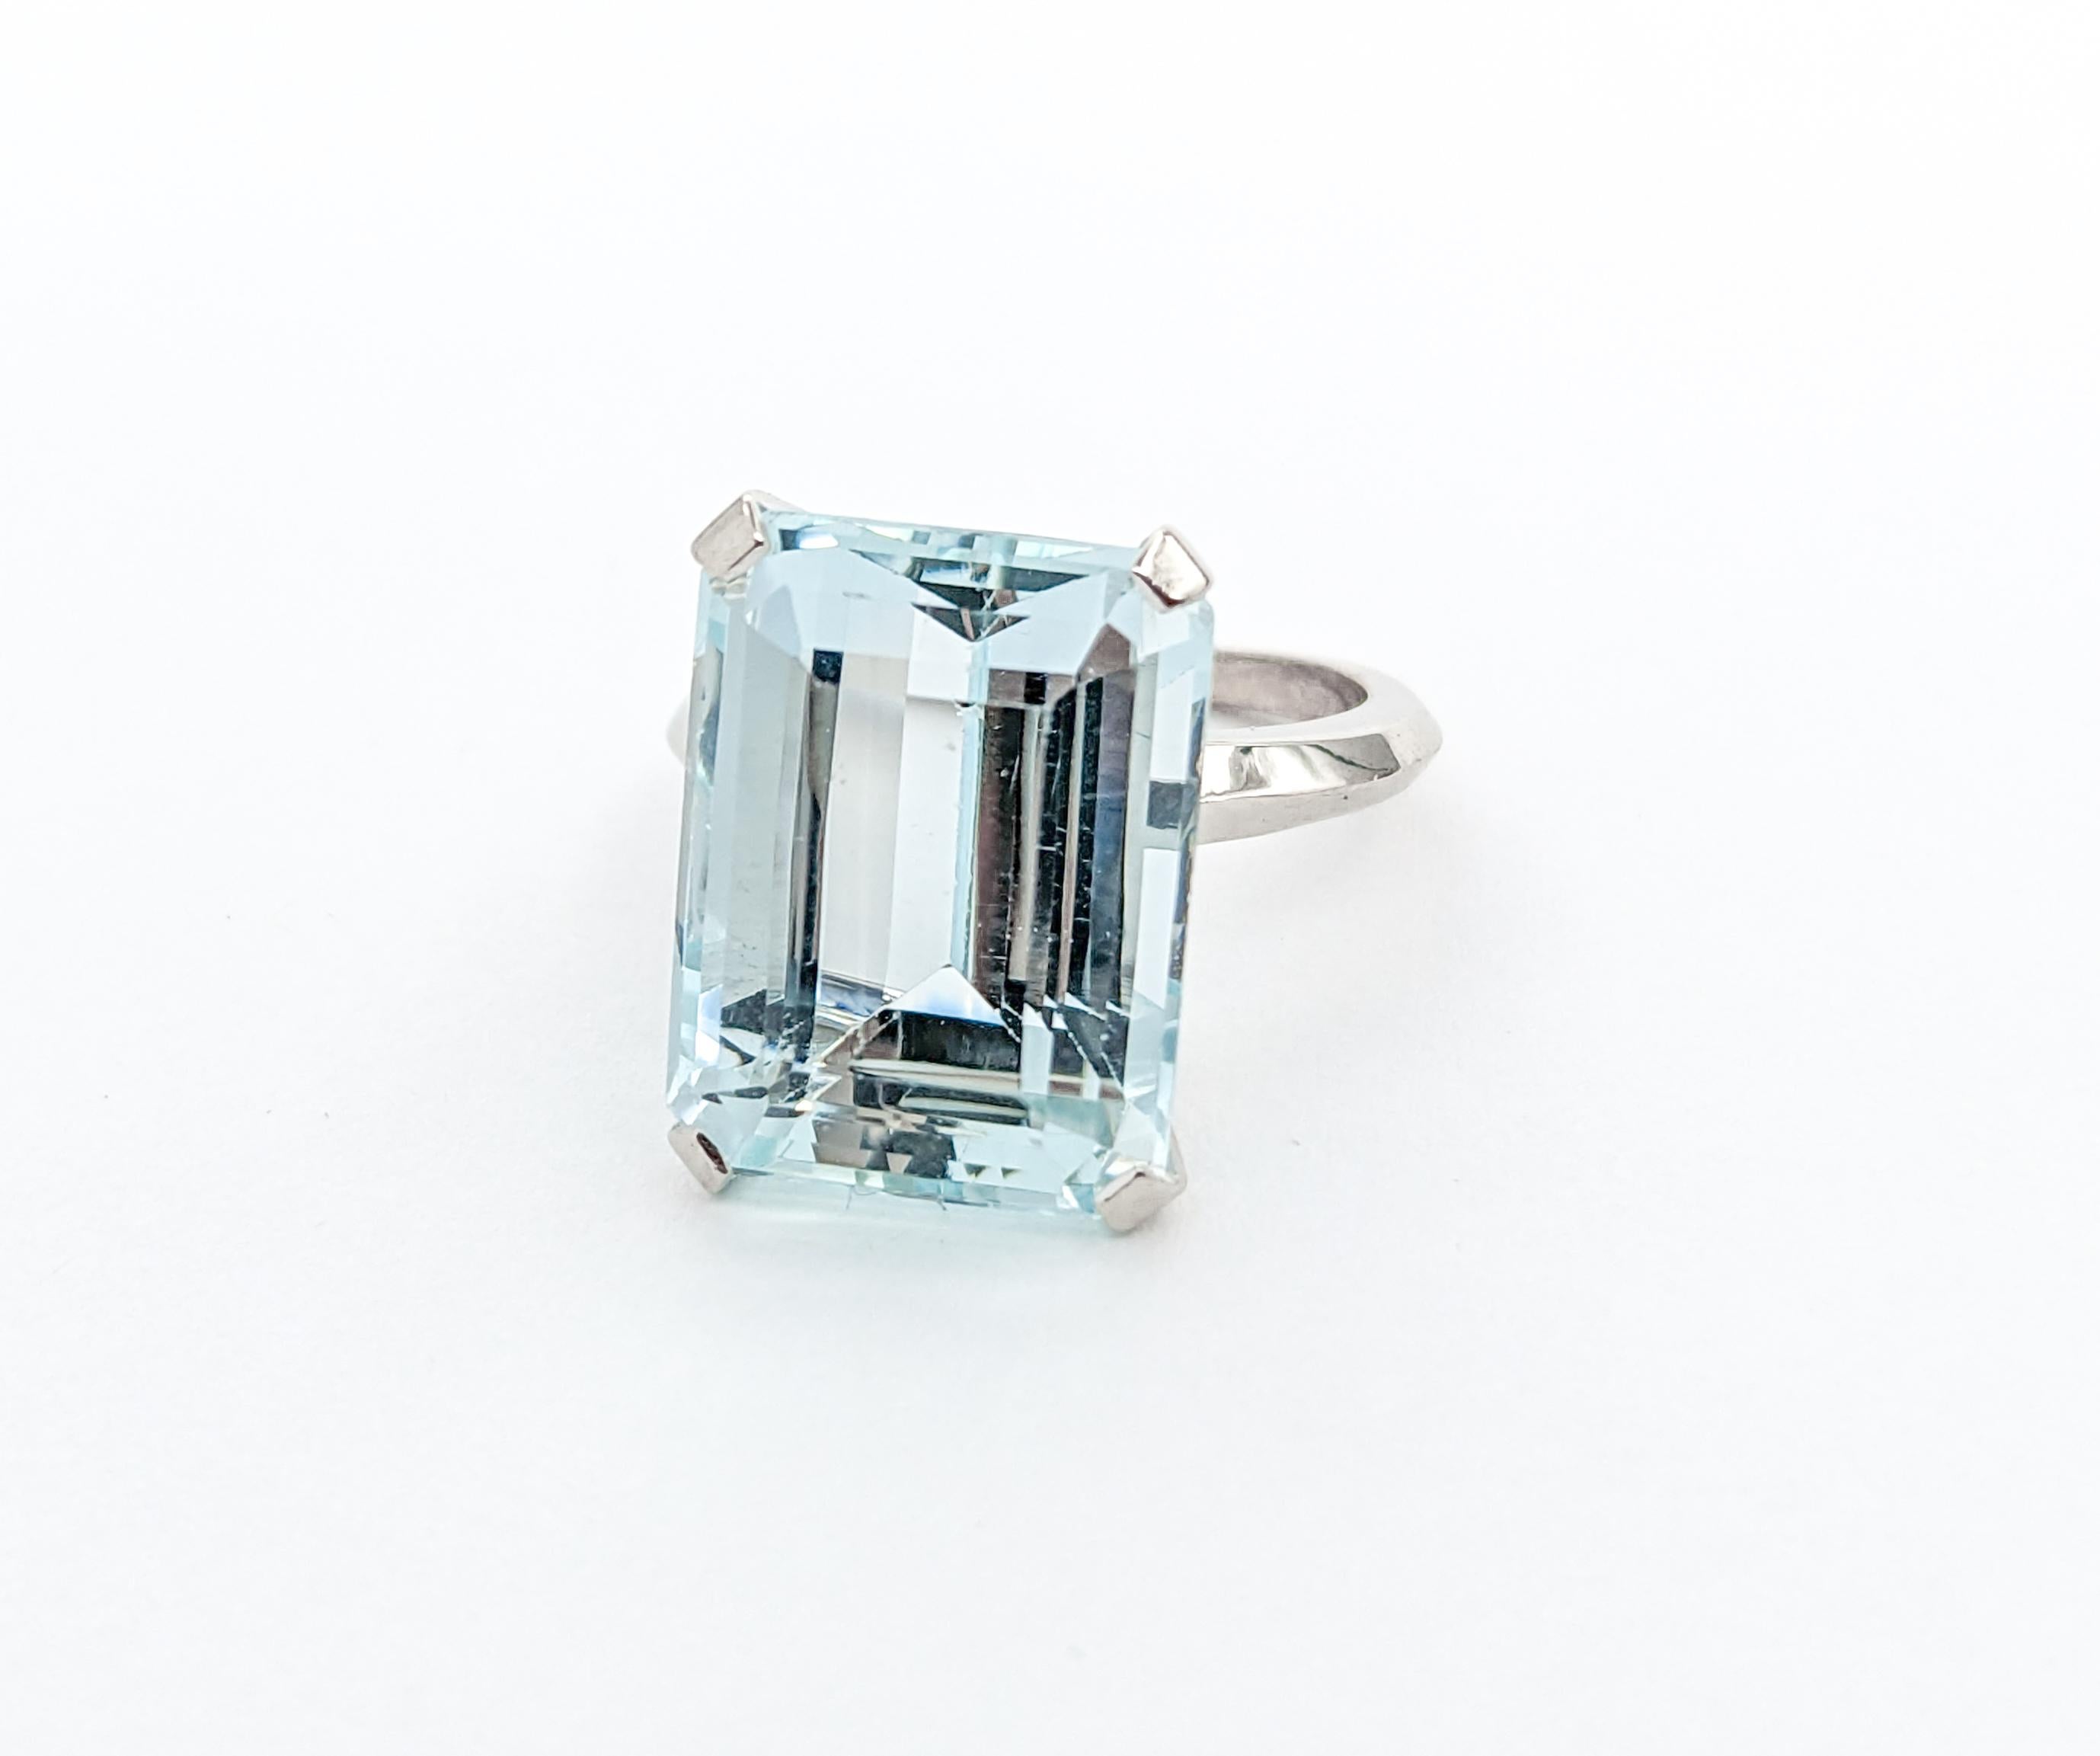 16.5ct Emerald Cut Aquamarine Cocktail Ring In White Gold

Introducing an exquisite Gemstone Cocktail Ring, masterfully crafted in 14k White Gold. This elegant piece showcases a breathtaking 16.5ct Emerald Cut Aquamarine as its centerpiece, set in a